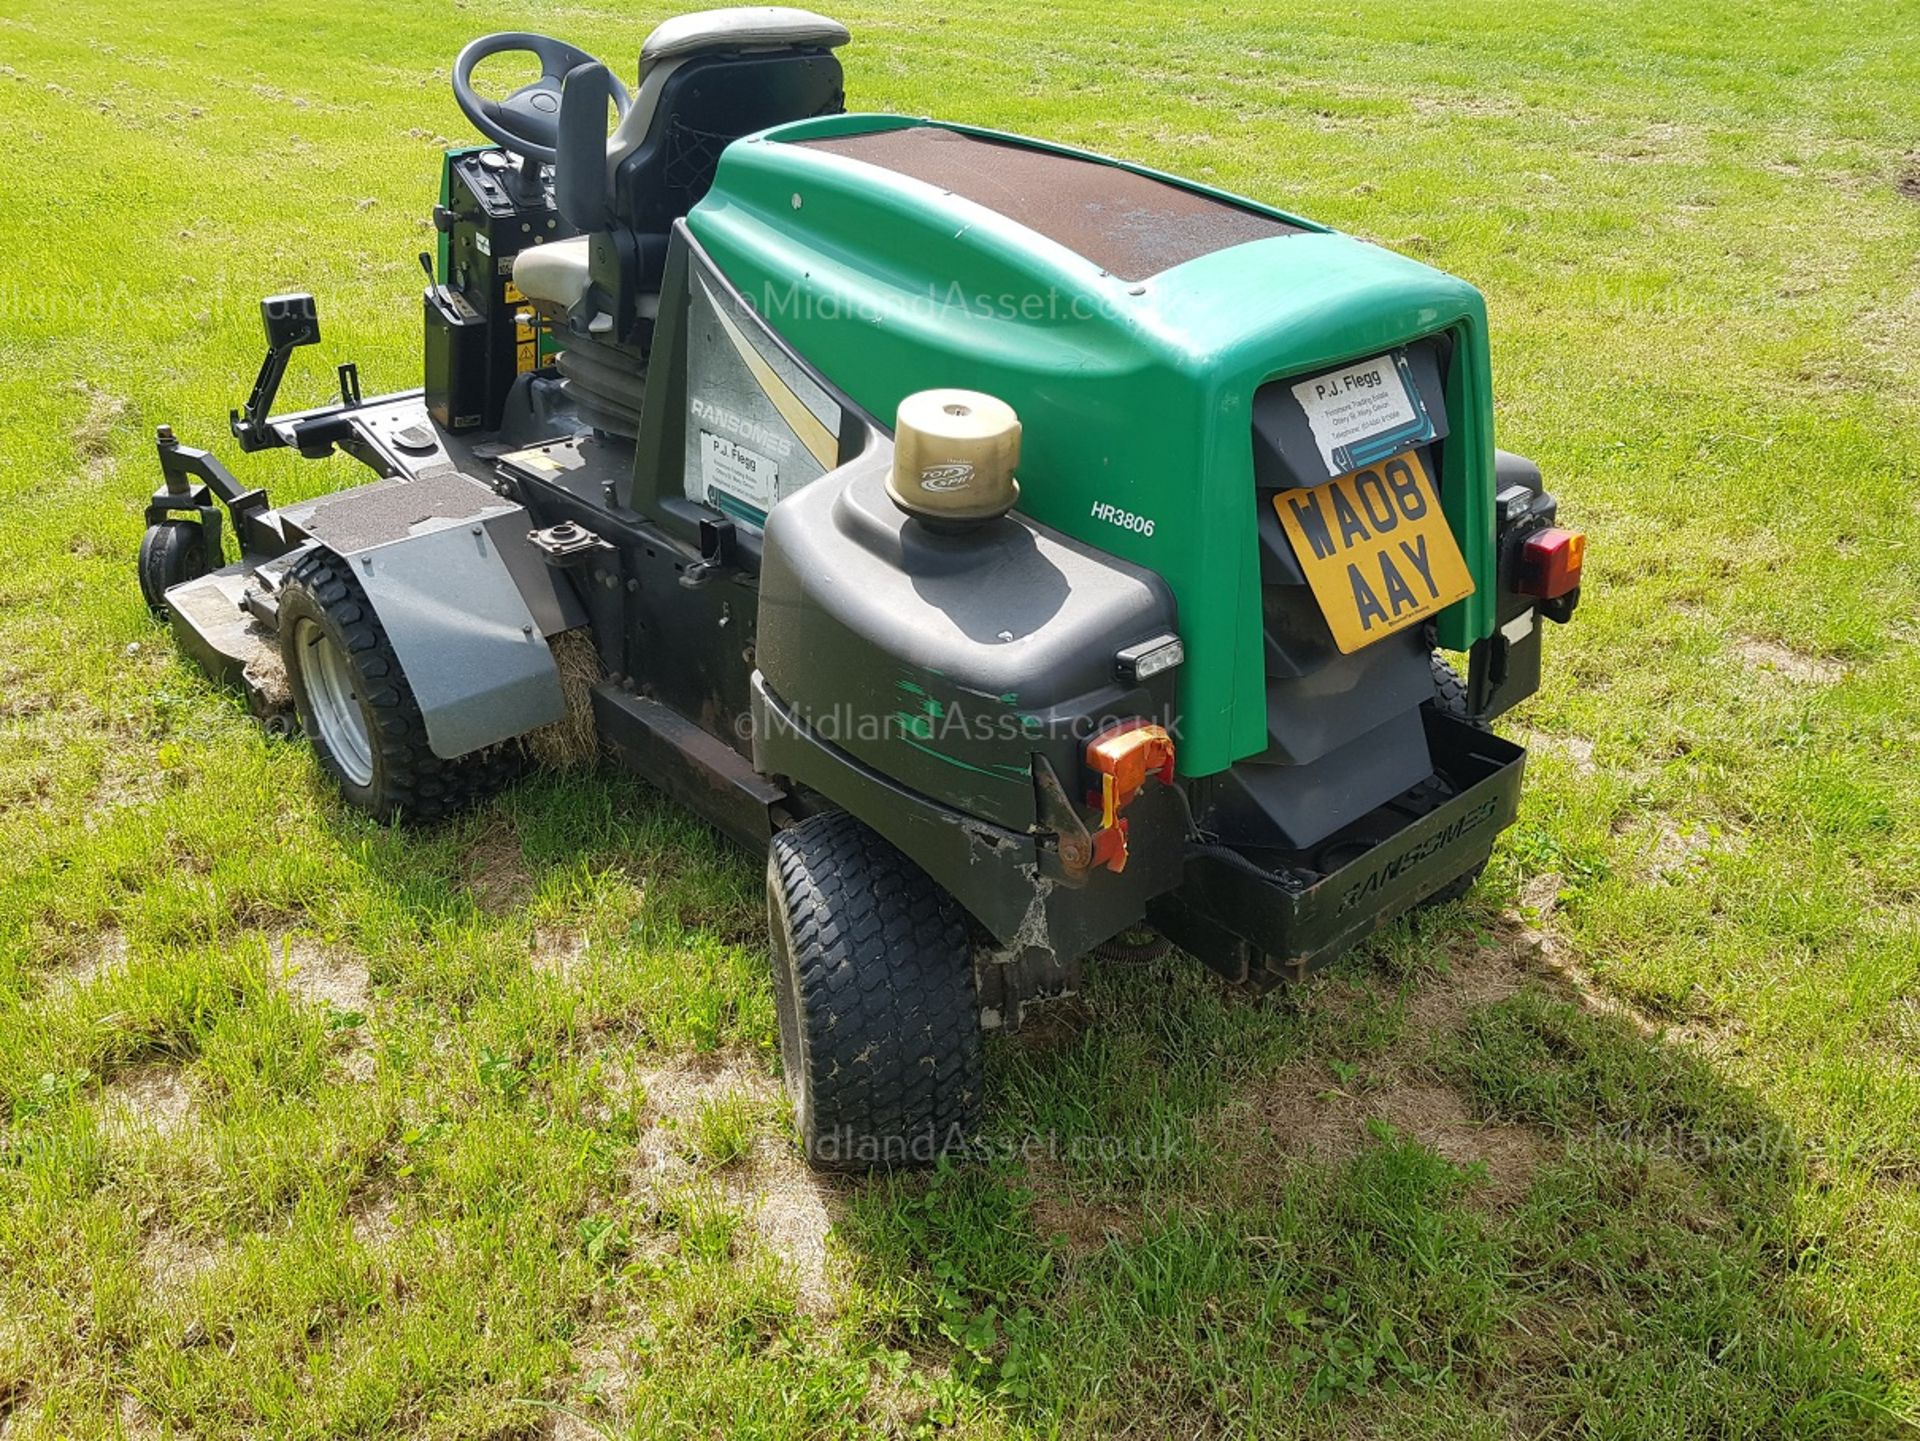 2008 RANSOMES HR3806 ROTARY MOWER, STARTS, DRIVES AND MOWS *PLUS VAT* - Image 5 of 9